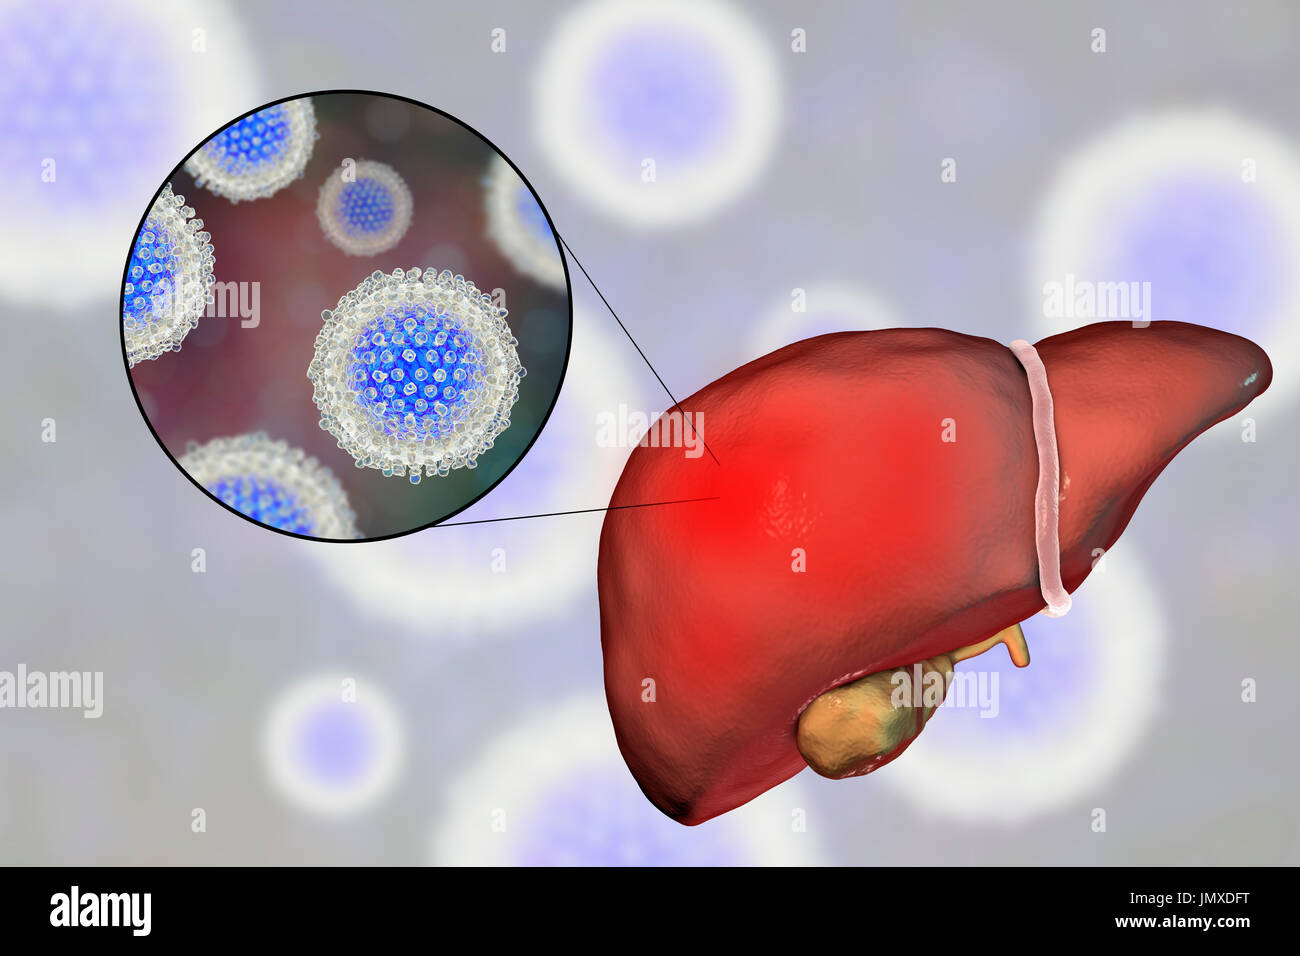 Liver with hepatitis and close-up view of hepatitis C viruses, illustration. Stock Photo